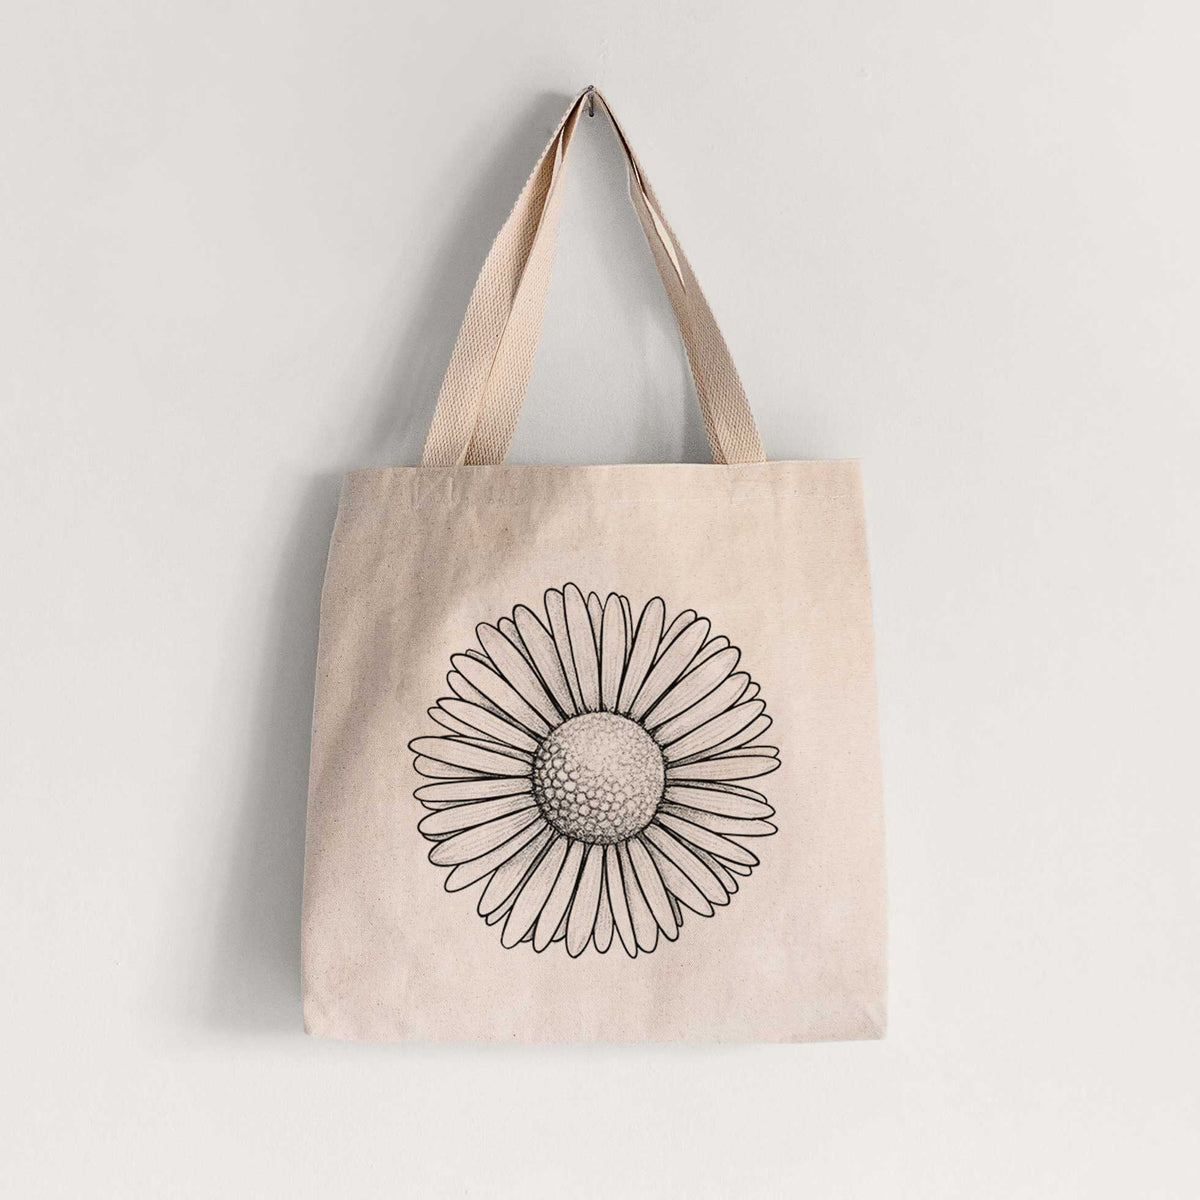 Bellis perennis - The Common Daisy - Tote Bag